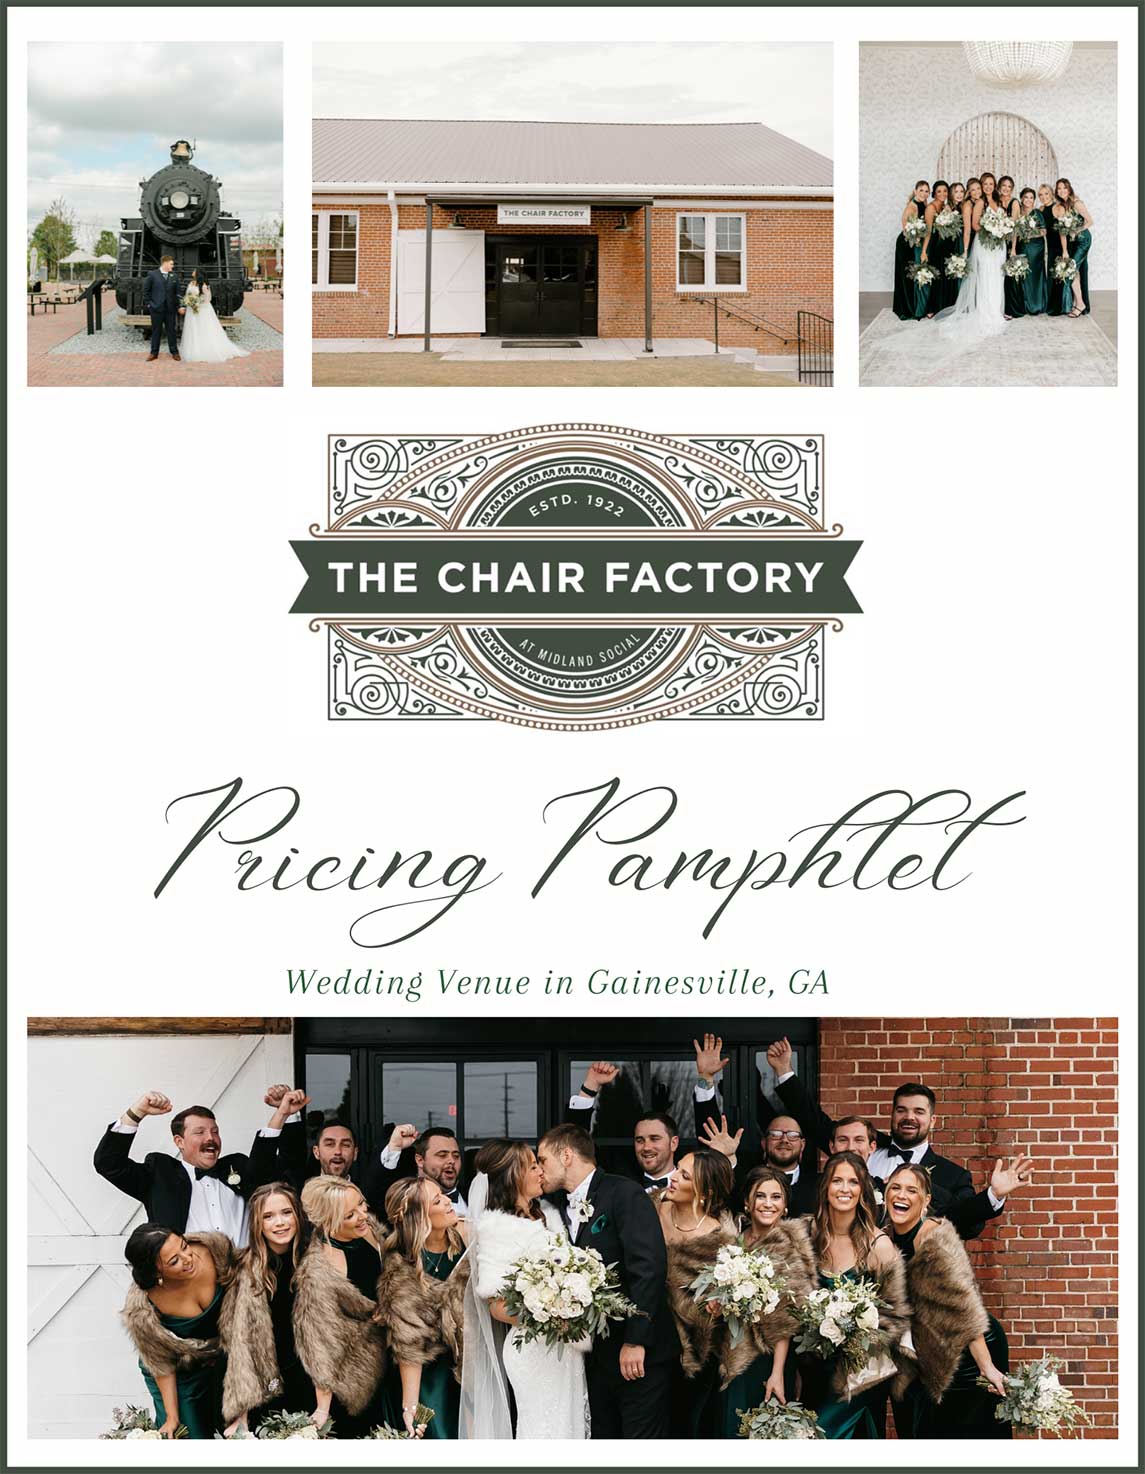 Pricing information for industrial wedding venue in Gainesville